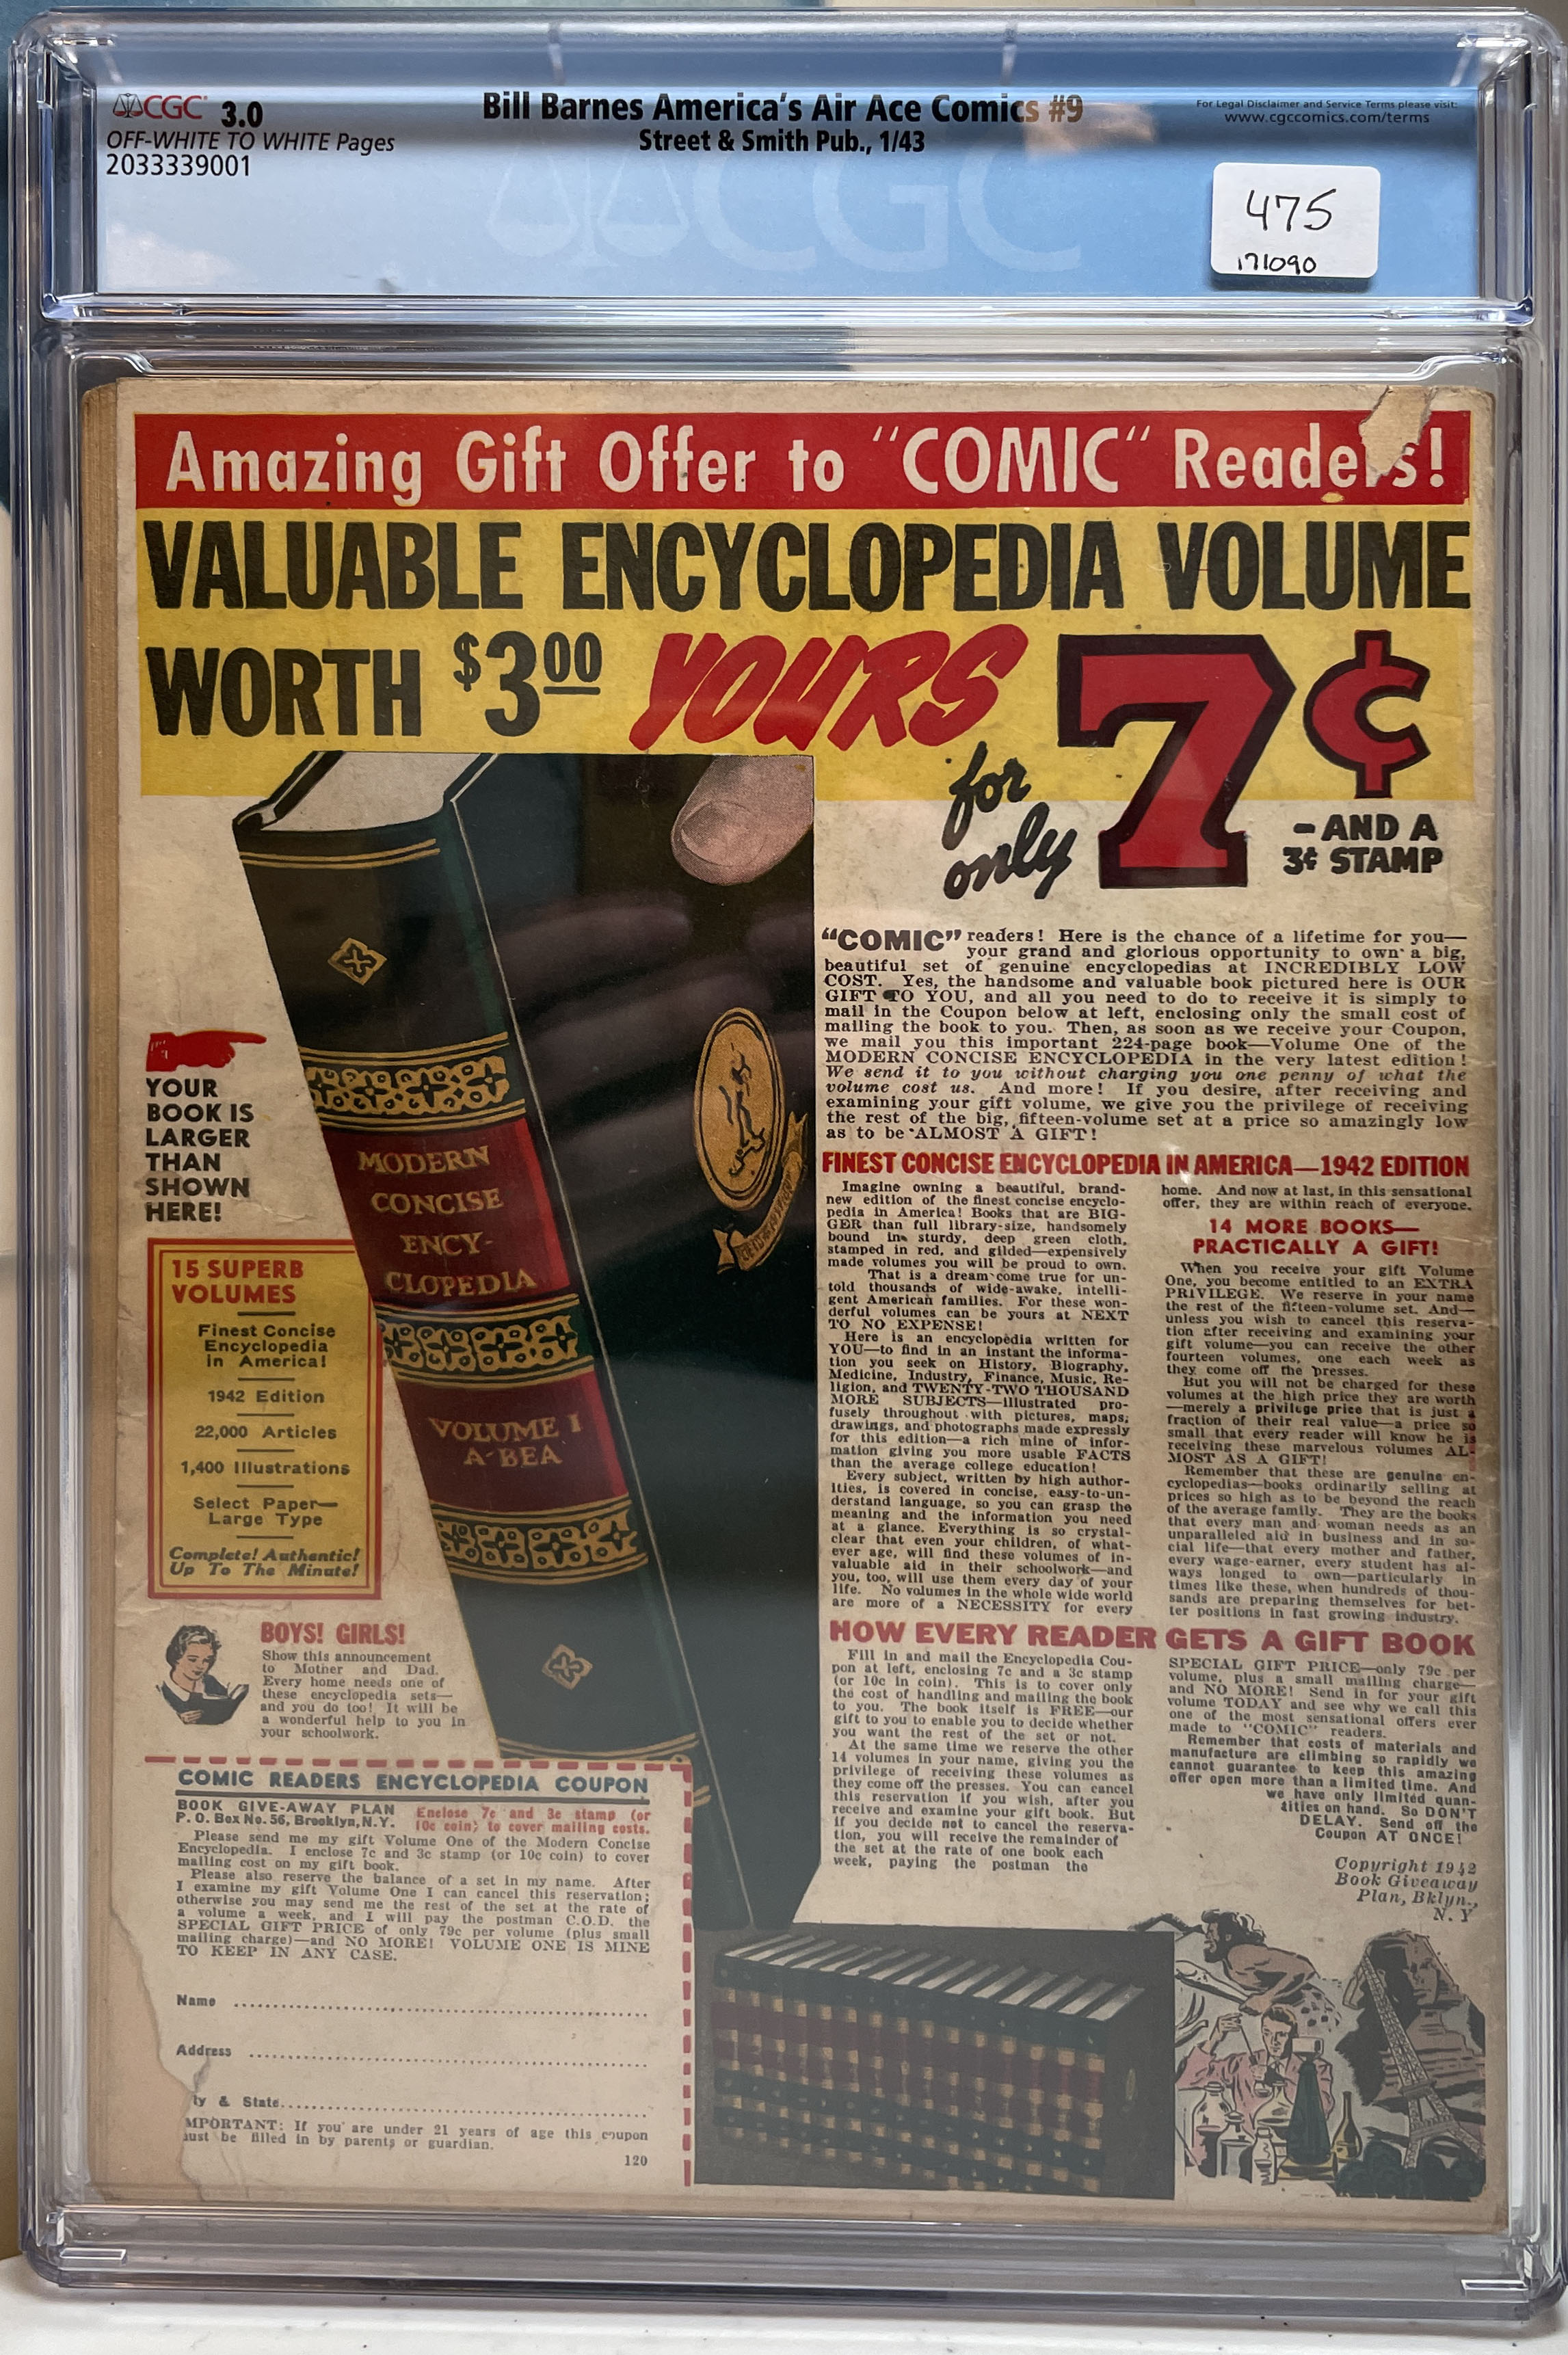 Air Ace(Vol. 1) #9 CGC 3.0 Back Cover